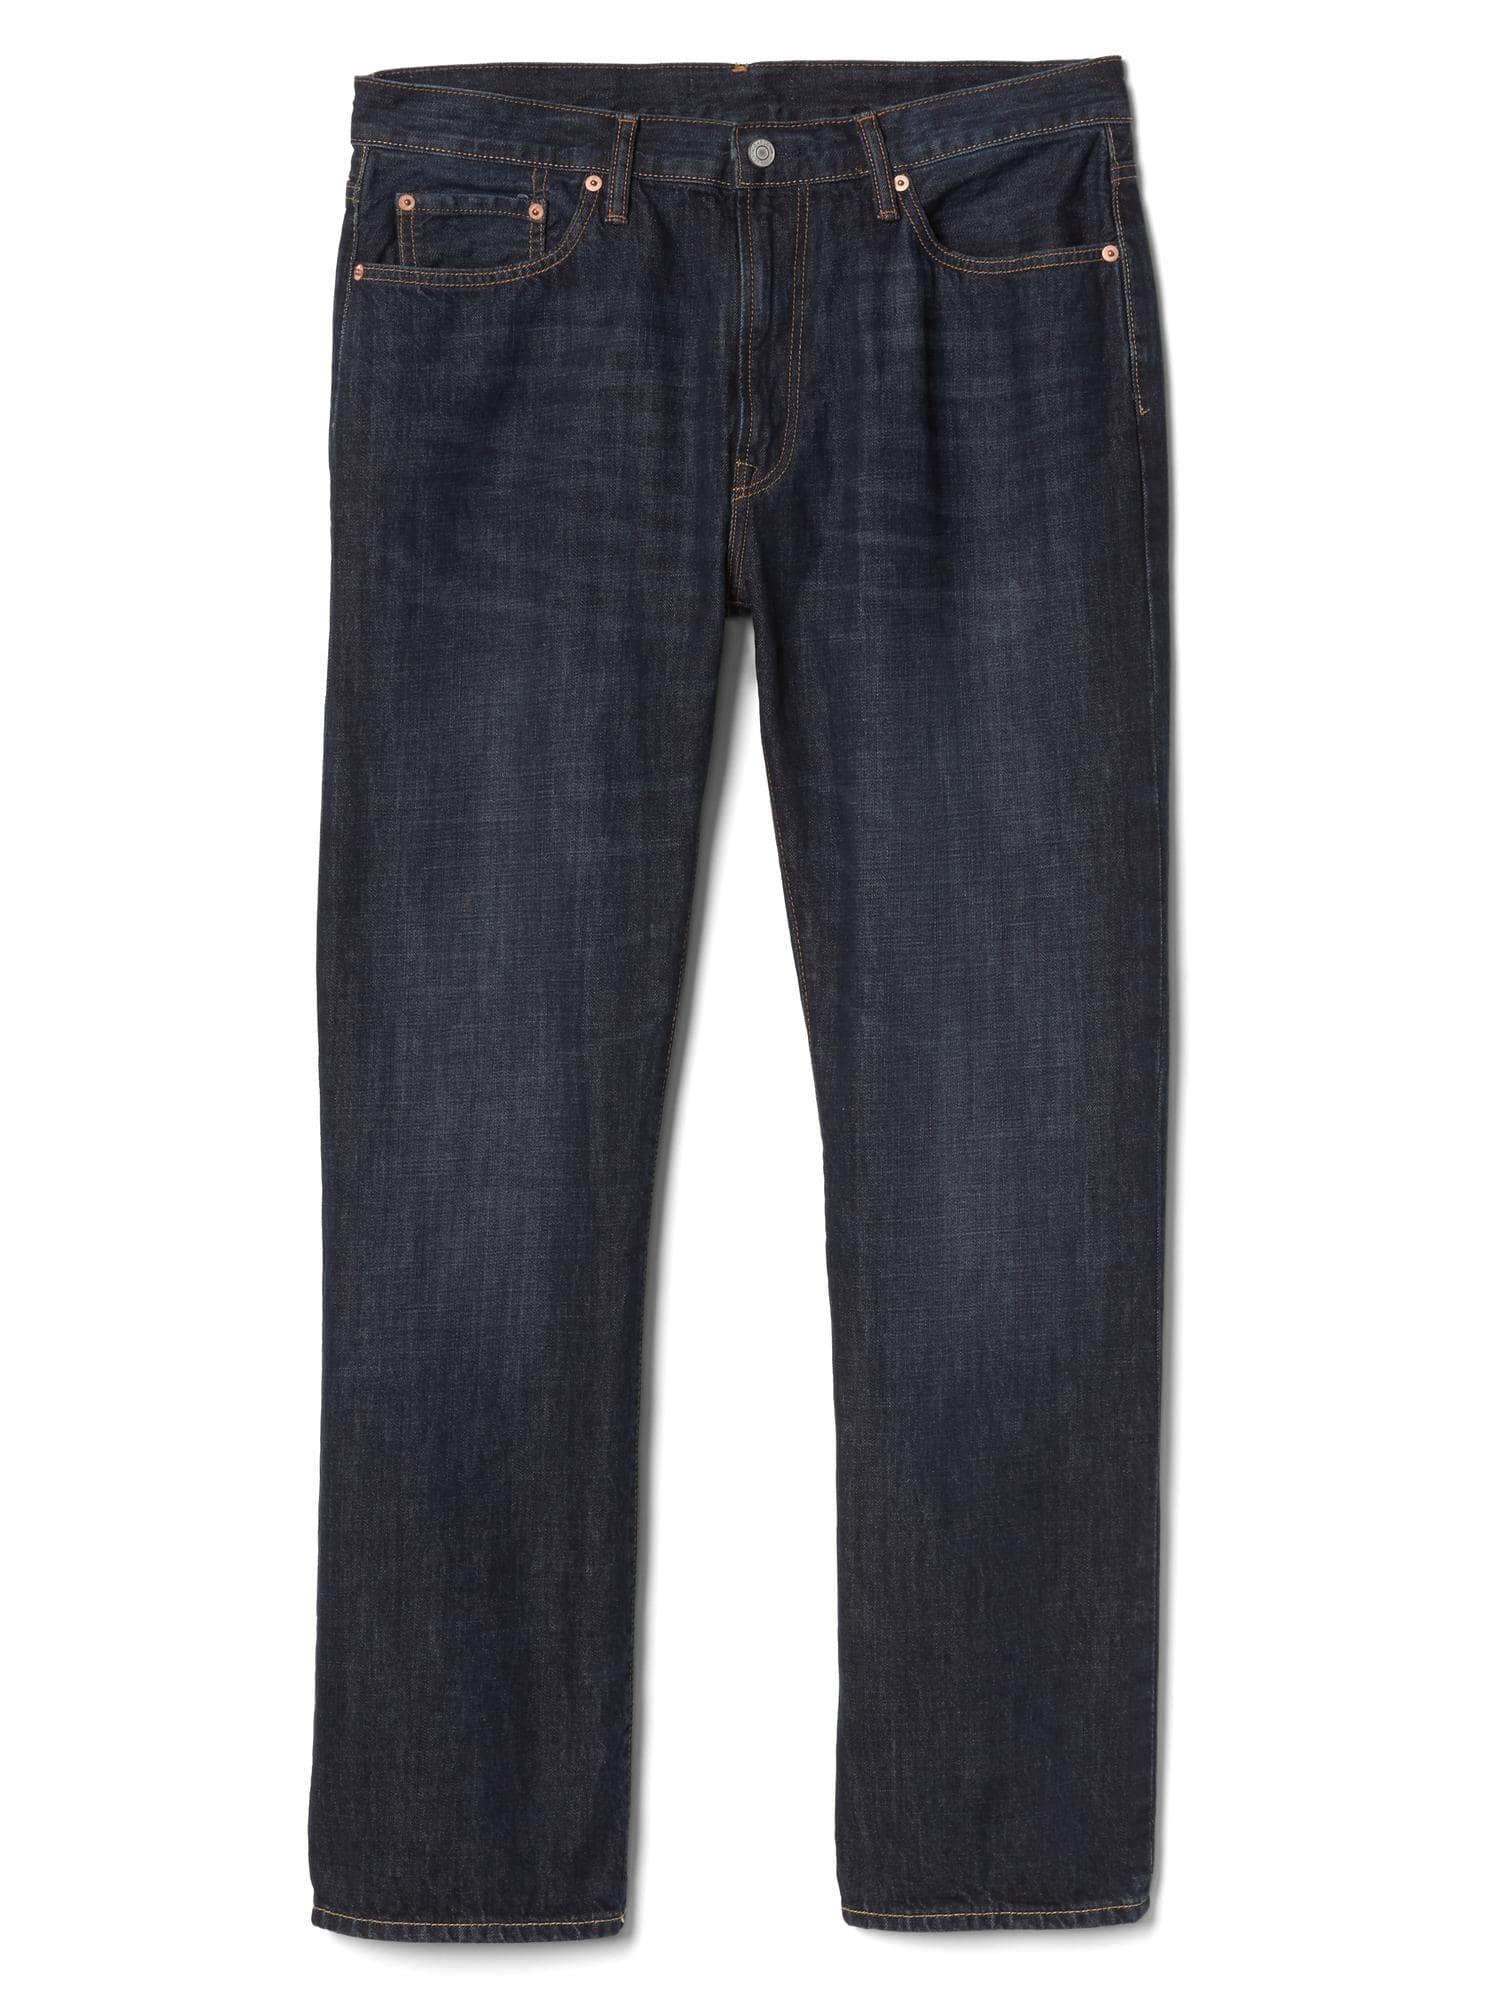 Lyst - Gap Relaxed Fit Jeans in Blue for Men